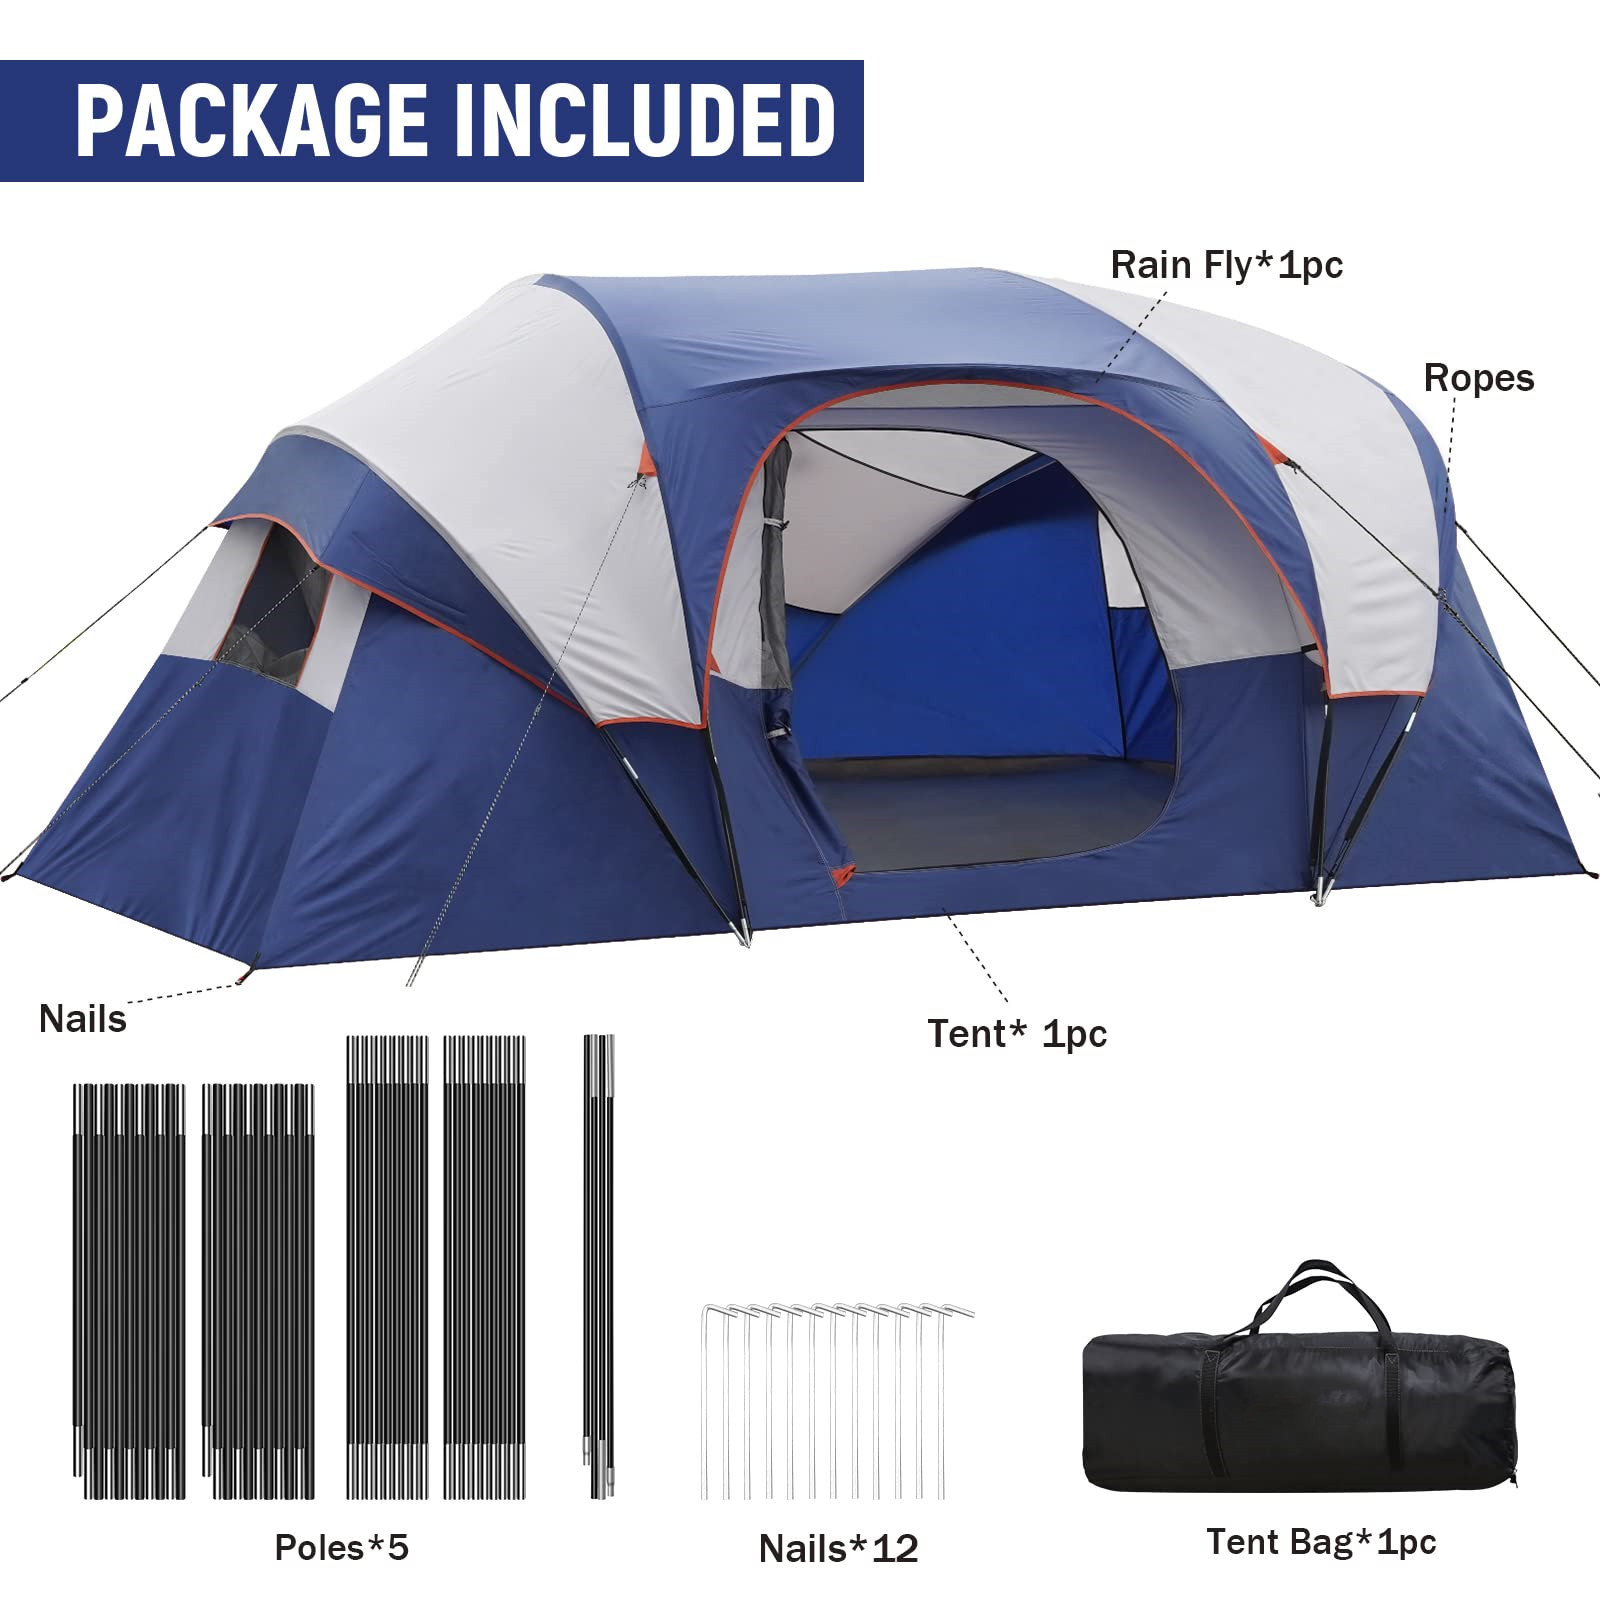 Tent-8-Person-Camping-Tents, Waterproof Windproof Family Tent, 5 Large Mesh Windows, Double Layer, Divided Curtain for Separated Room, Portable with Carry Bag